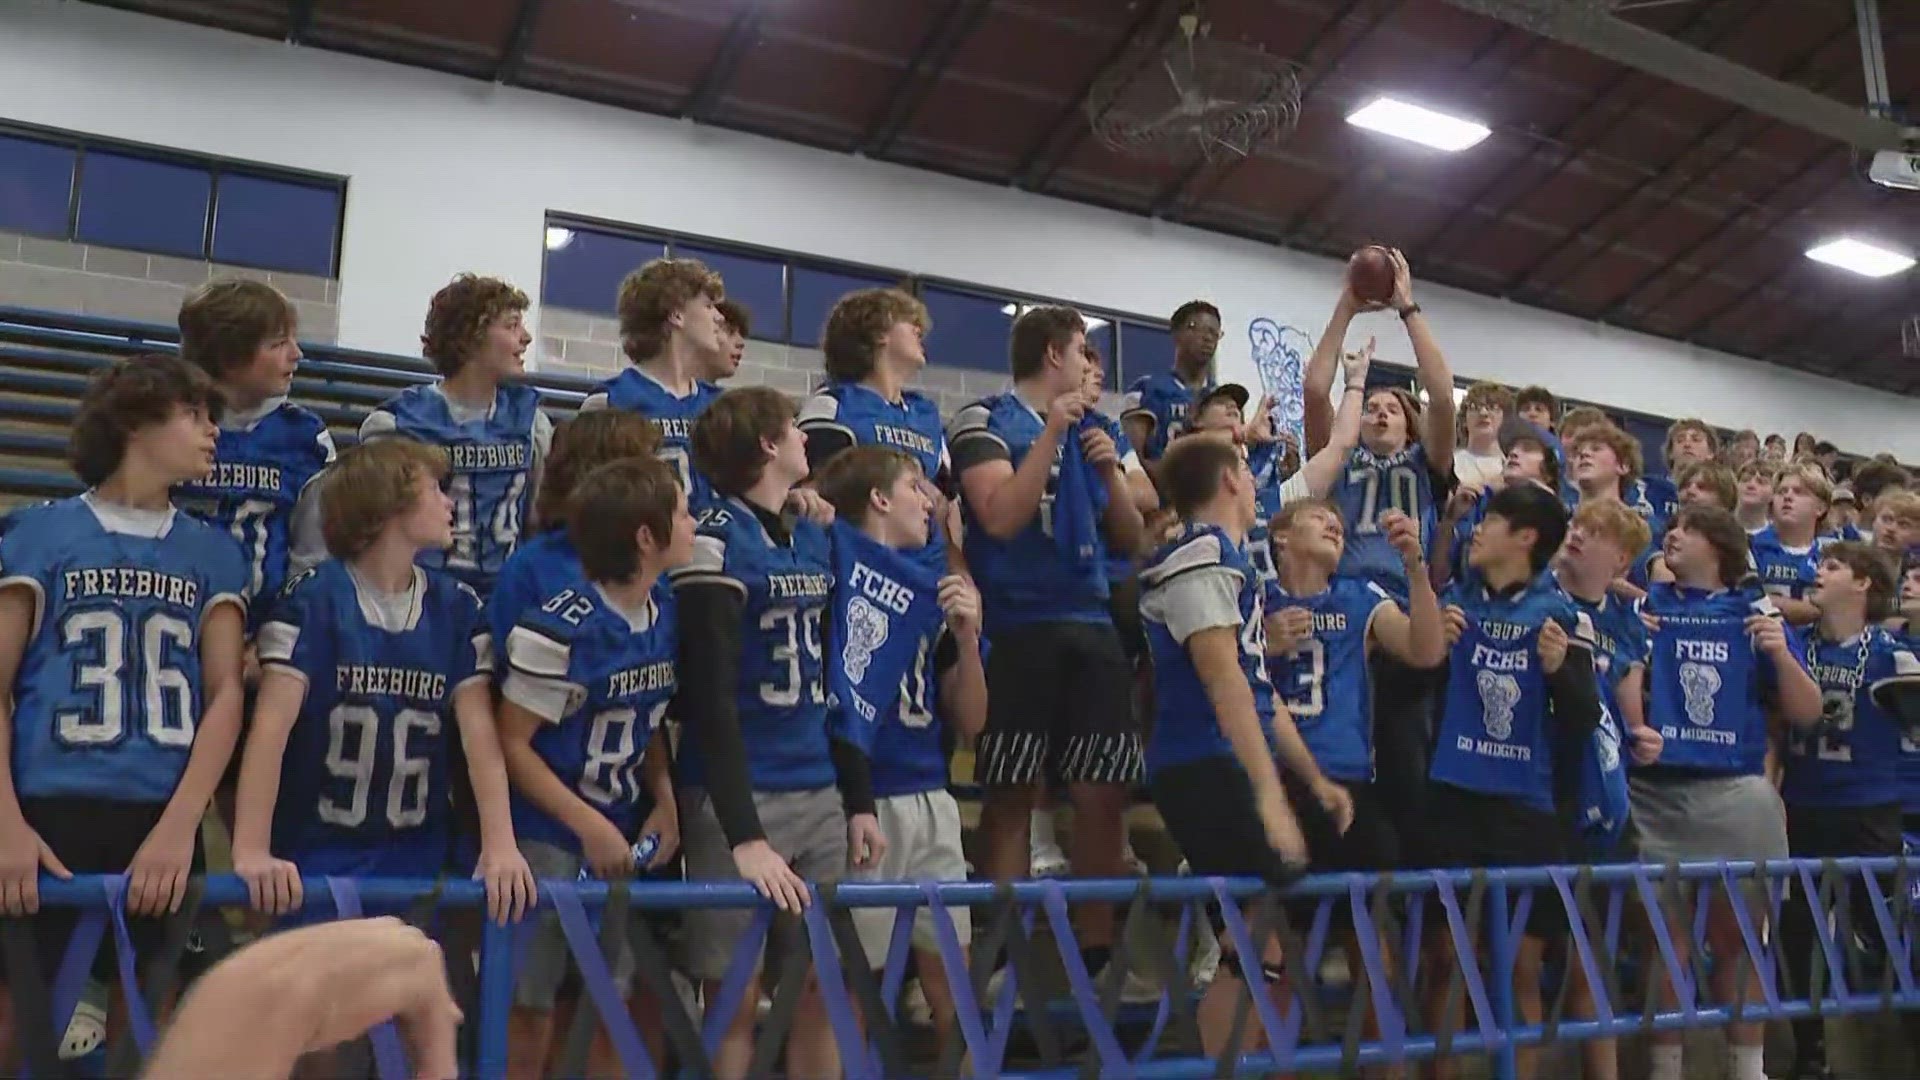 Freeburg High School football, band, cheer and students wake up early to join Today in St. Louis. The high school is facing rival Columbia High School Friday night.